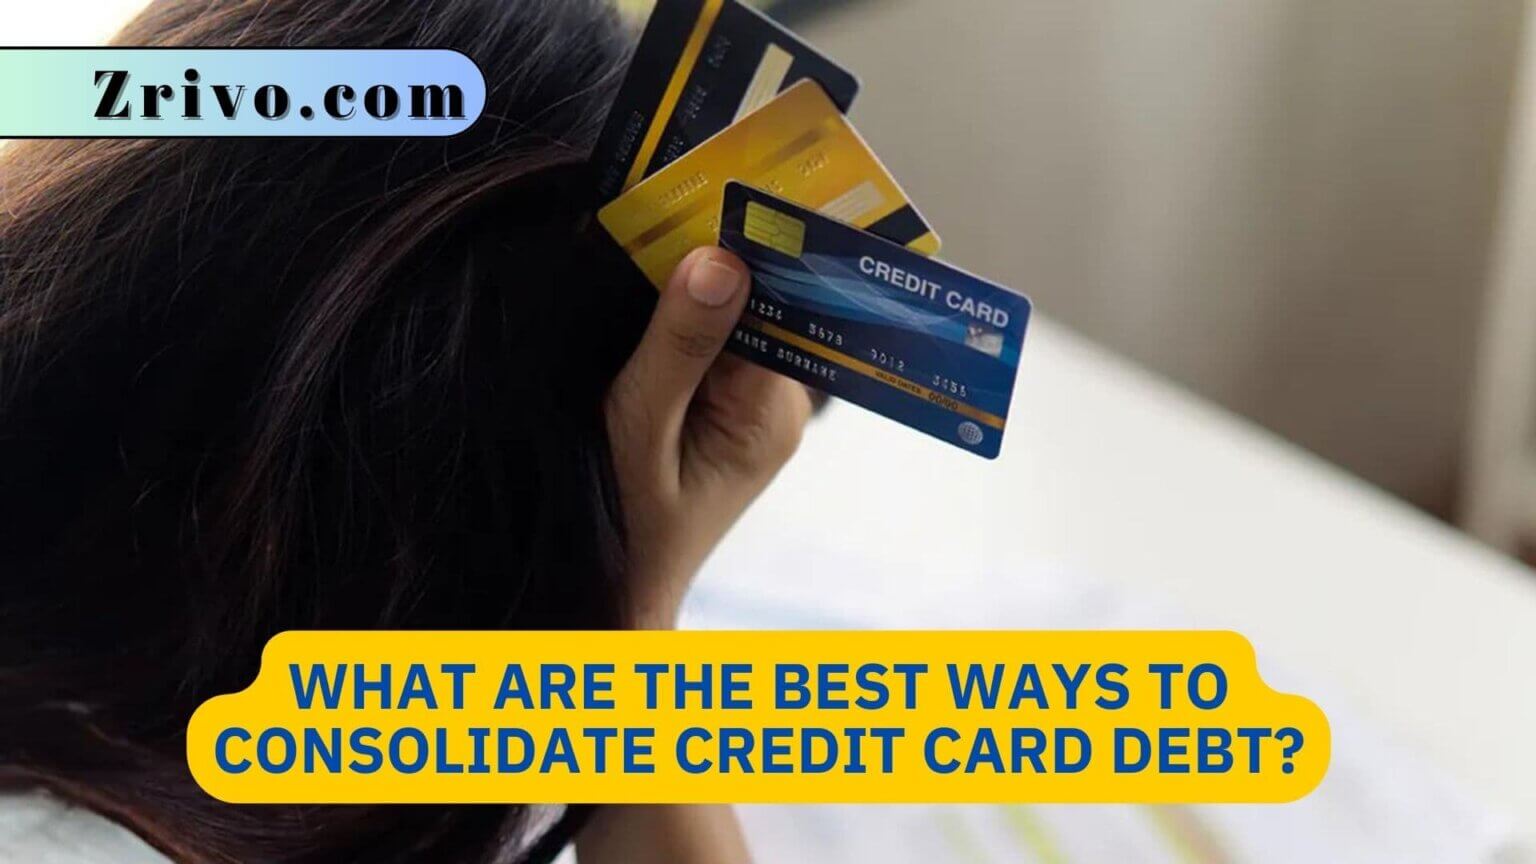 What Are The Best Ways To Consolidate Credit Card Debt?